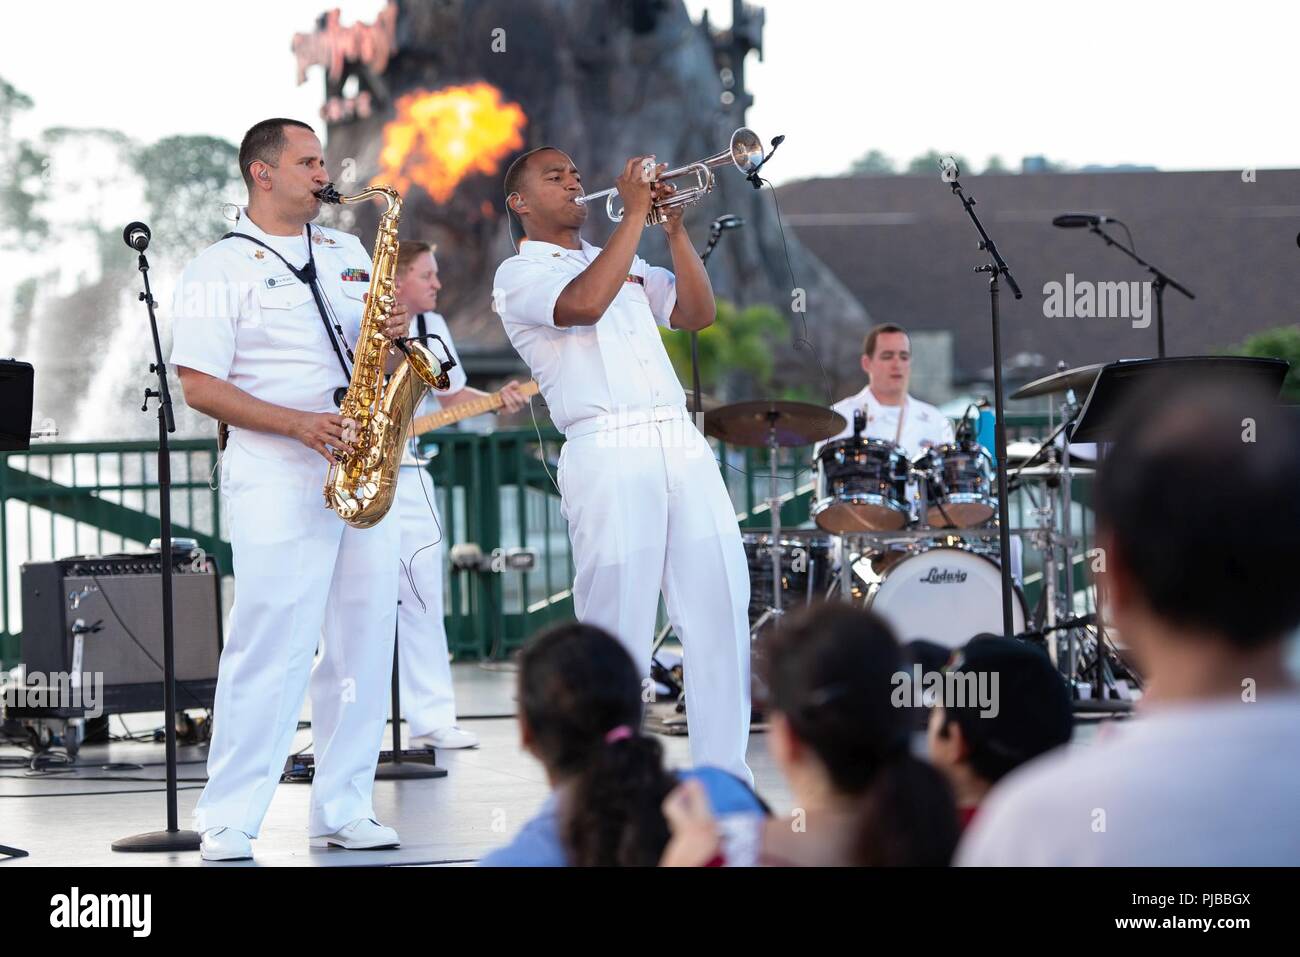 LAKE BUENA VISTA, Fla. (July 2, 2018) Musicians 1st Class Manuel Pelayo de Gongora, left, and David Smith, perform with the U.S. Navy Band Cruisers during a concert at the Disney Springs Marketplace Stage in Lake Buena Vista, Florida. The Navy Band performed in seven cities in Florida, connecting communities to the Navy and building awareness and support for the Navy. Stock Photo